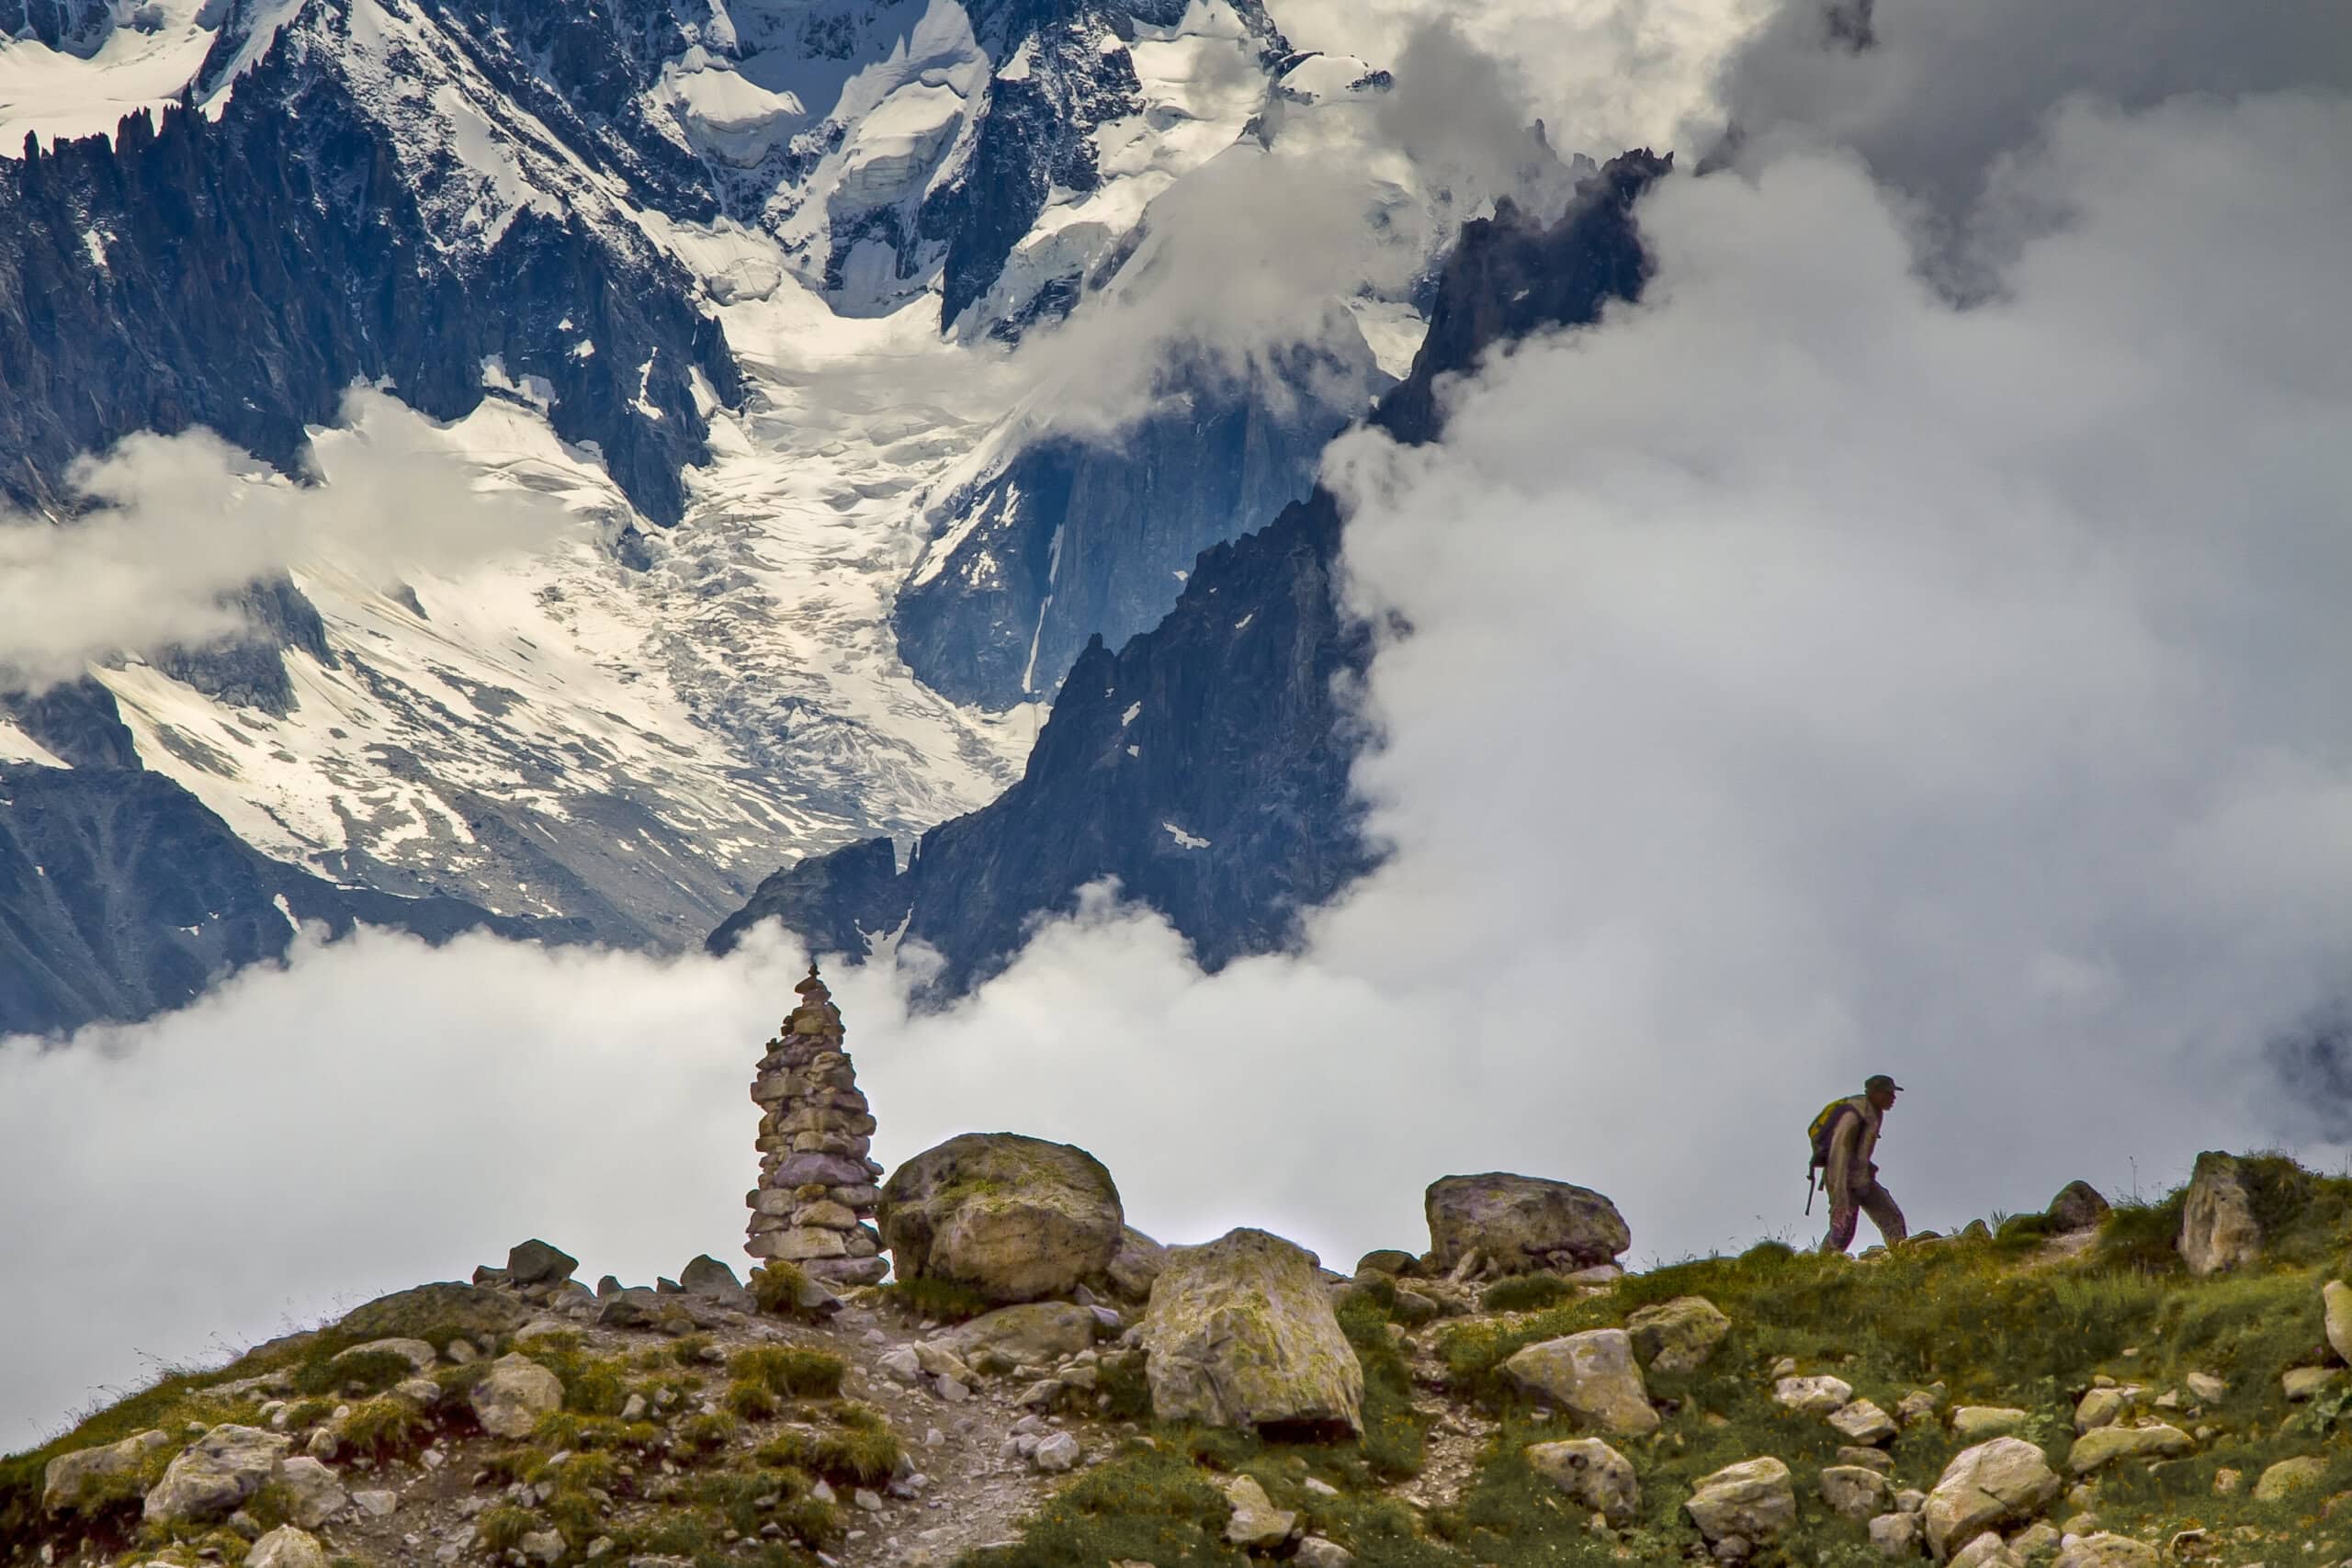 Hiking the Tour du Mont Blanc: An Overview Guide - Expedition Wildlife